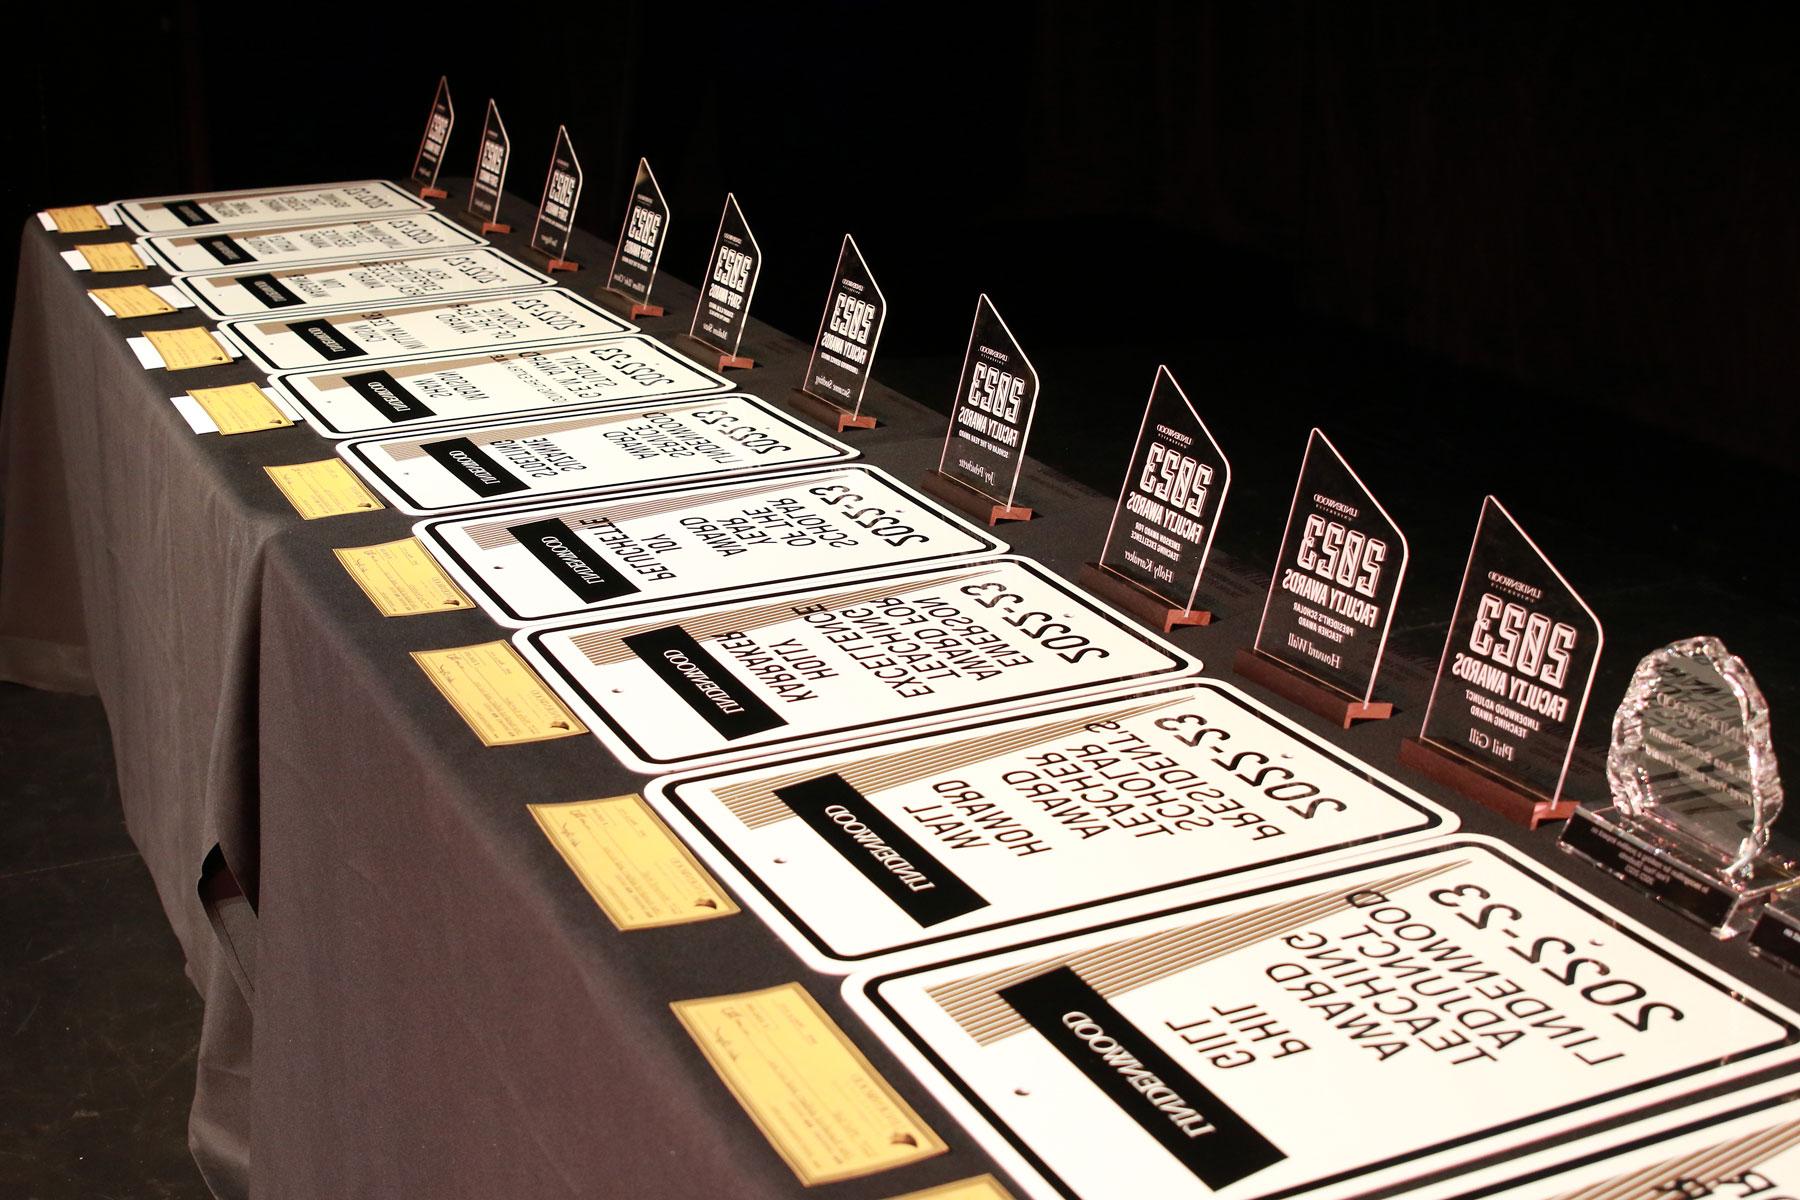 award winner signs and plaques